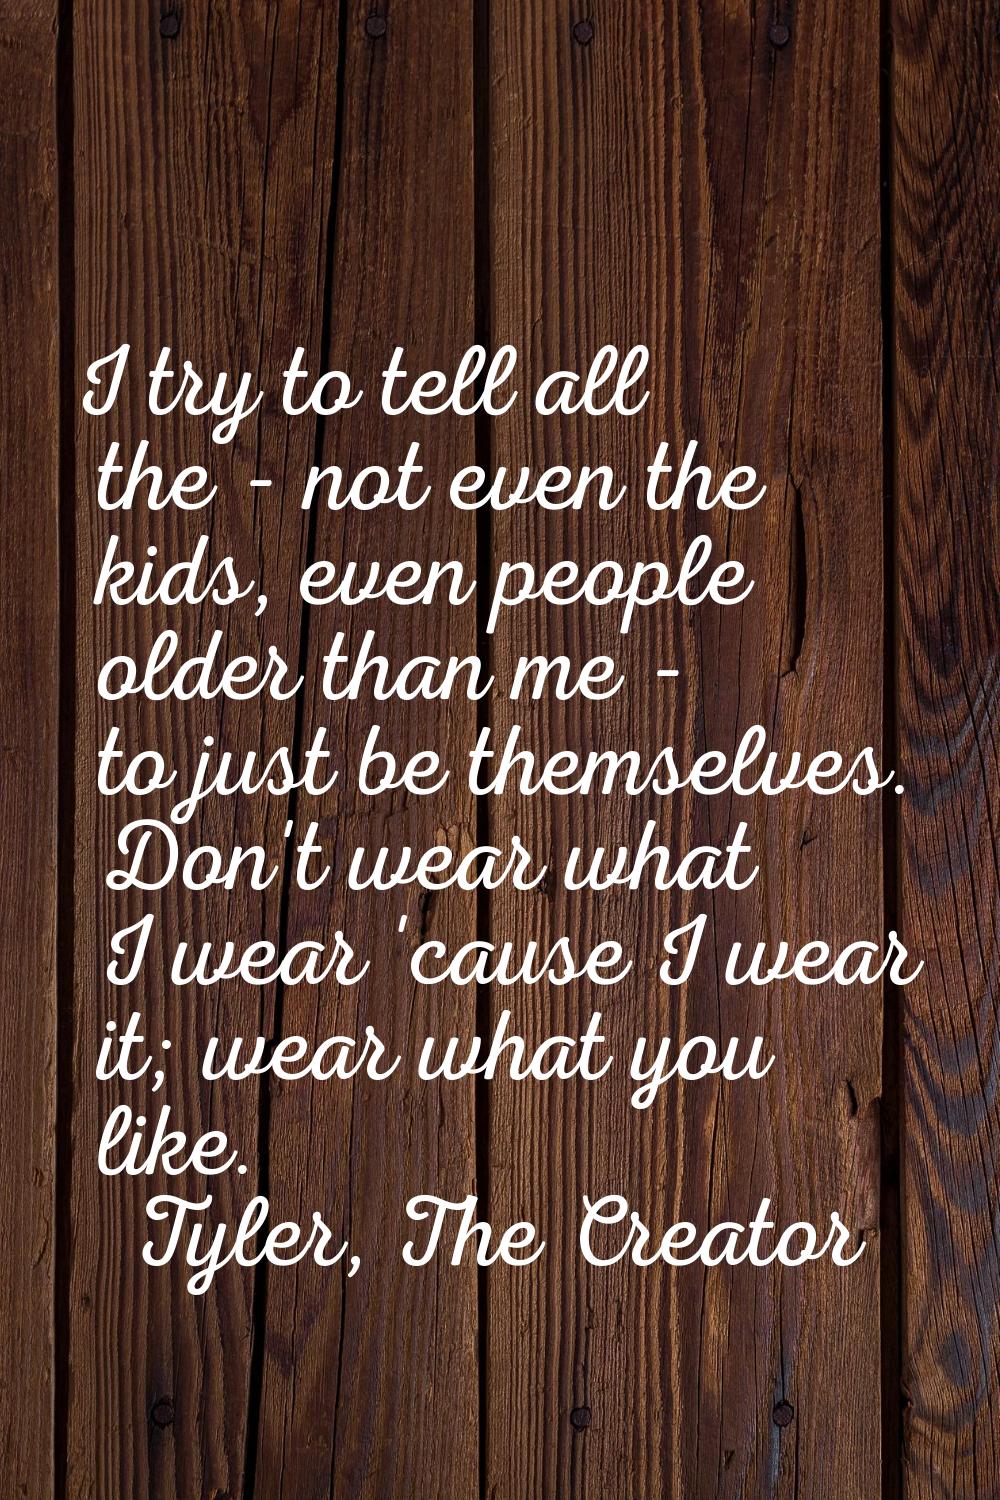 I try to tell all the - not even the kids, even people older than me - to just be themselves. Don't